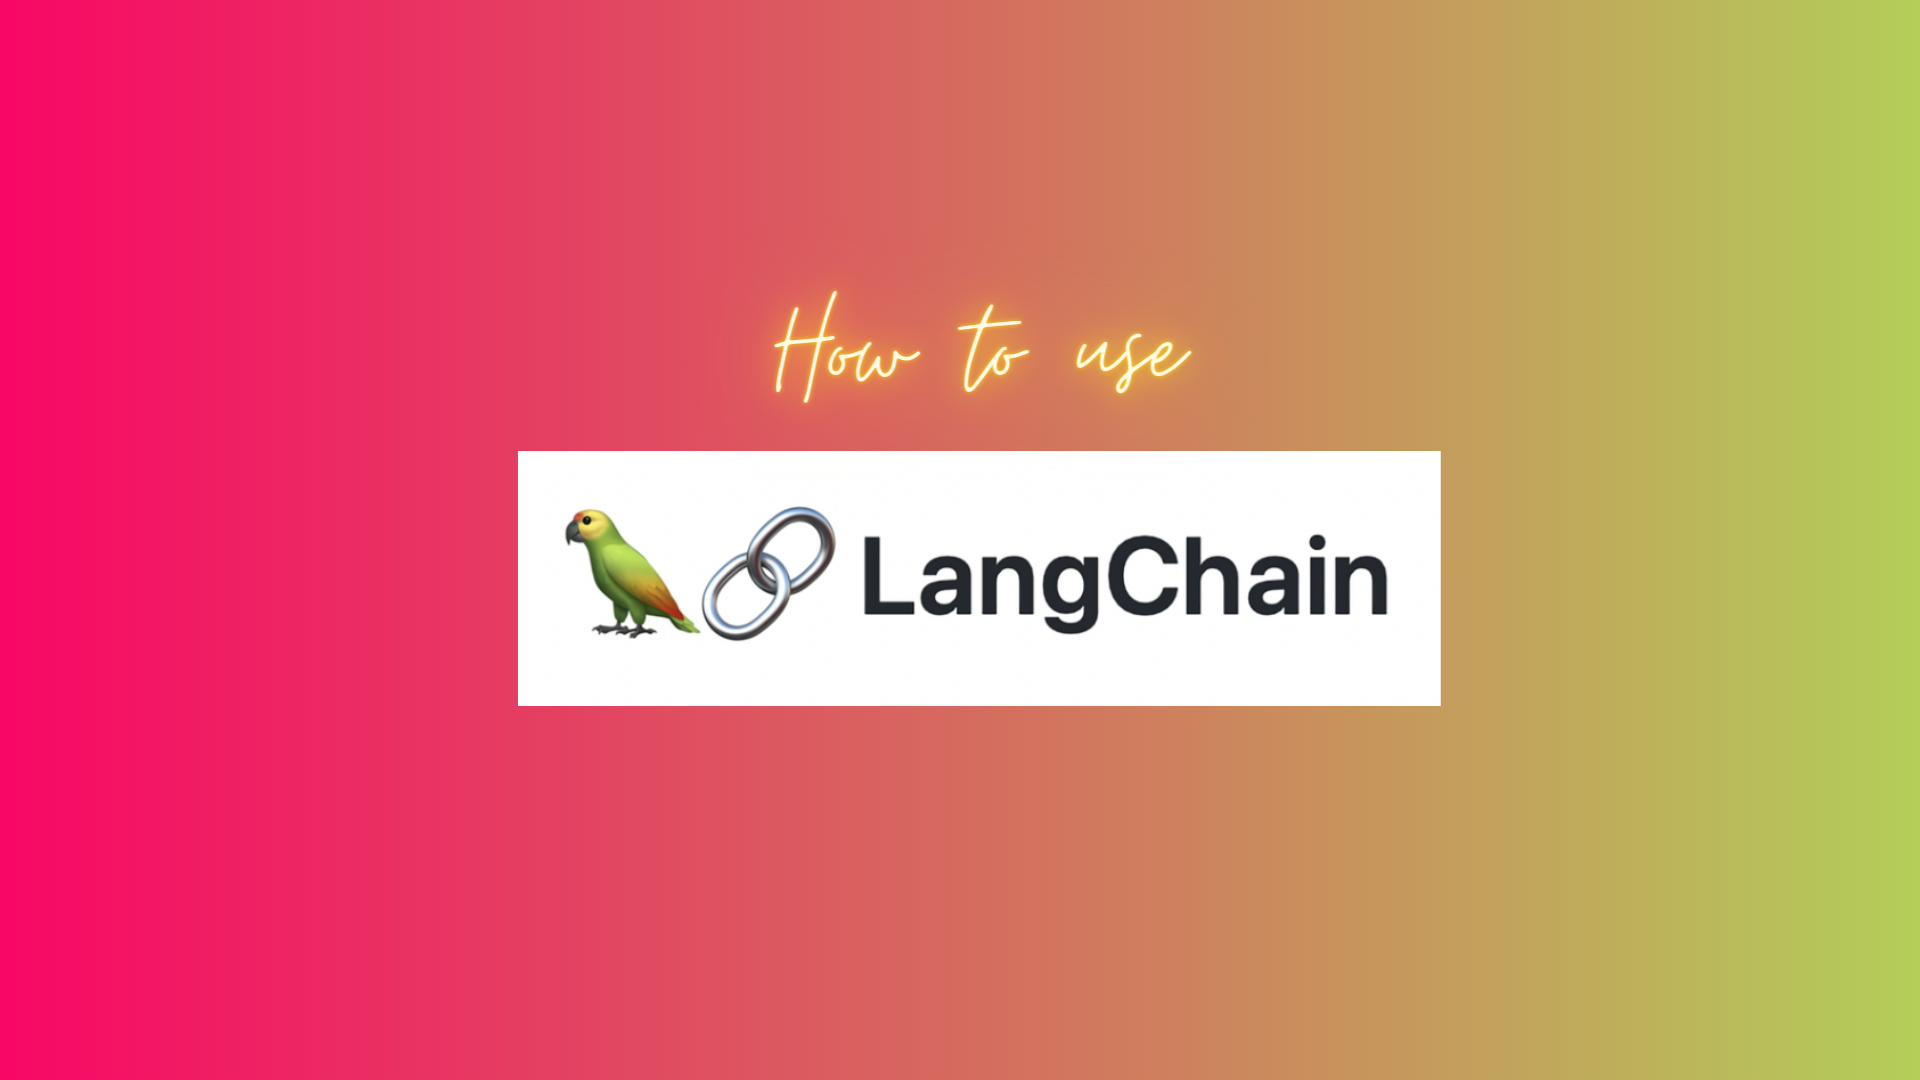 How to use LangChain, with logo on a blended red and green background